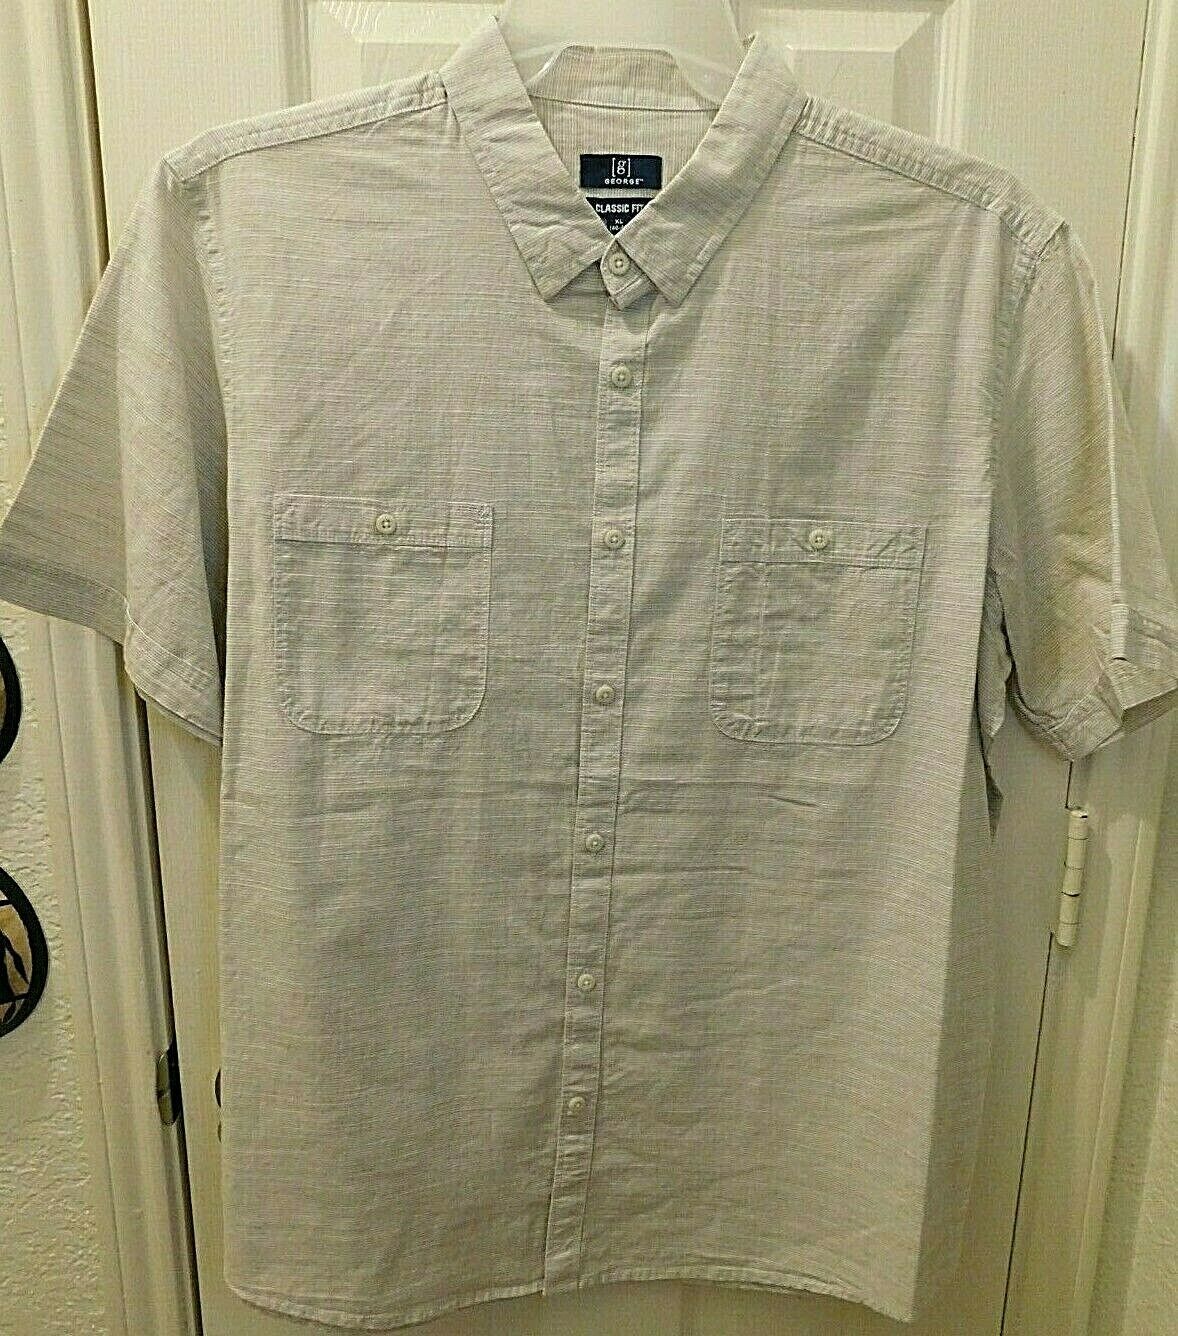 Primary image for George Men's Short Sleeve Button Front Shirt Size XL 46-48 Texture Woven Beige